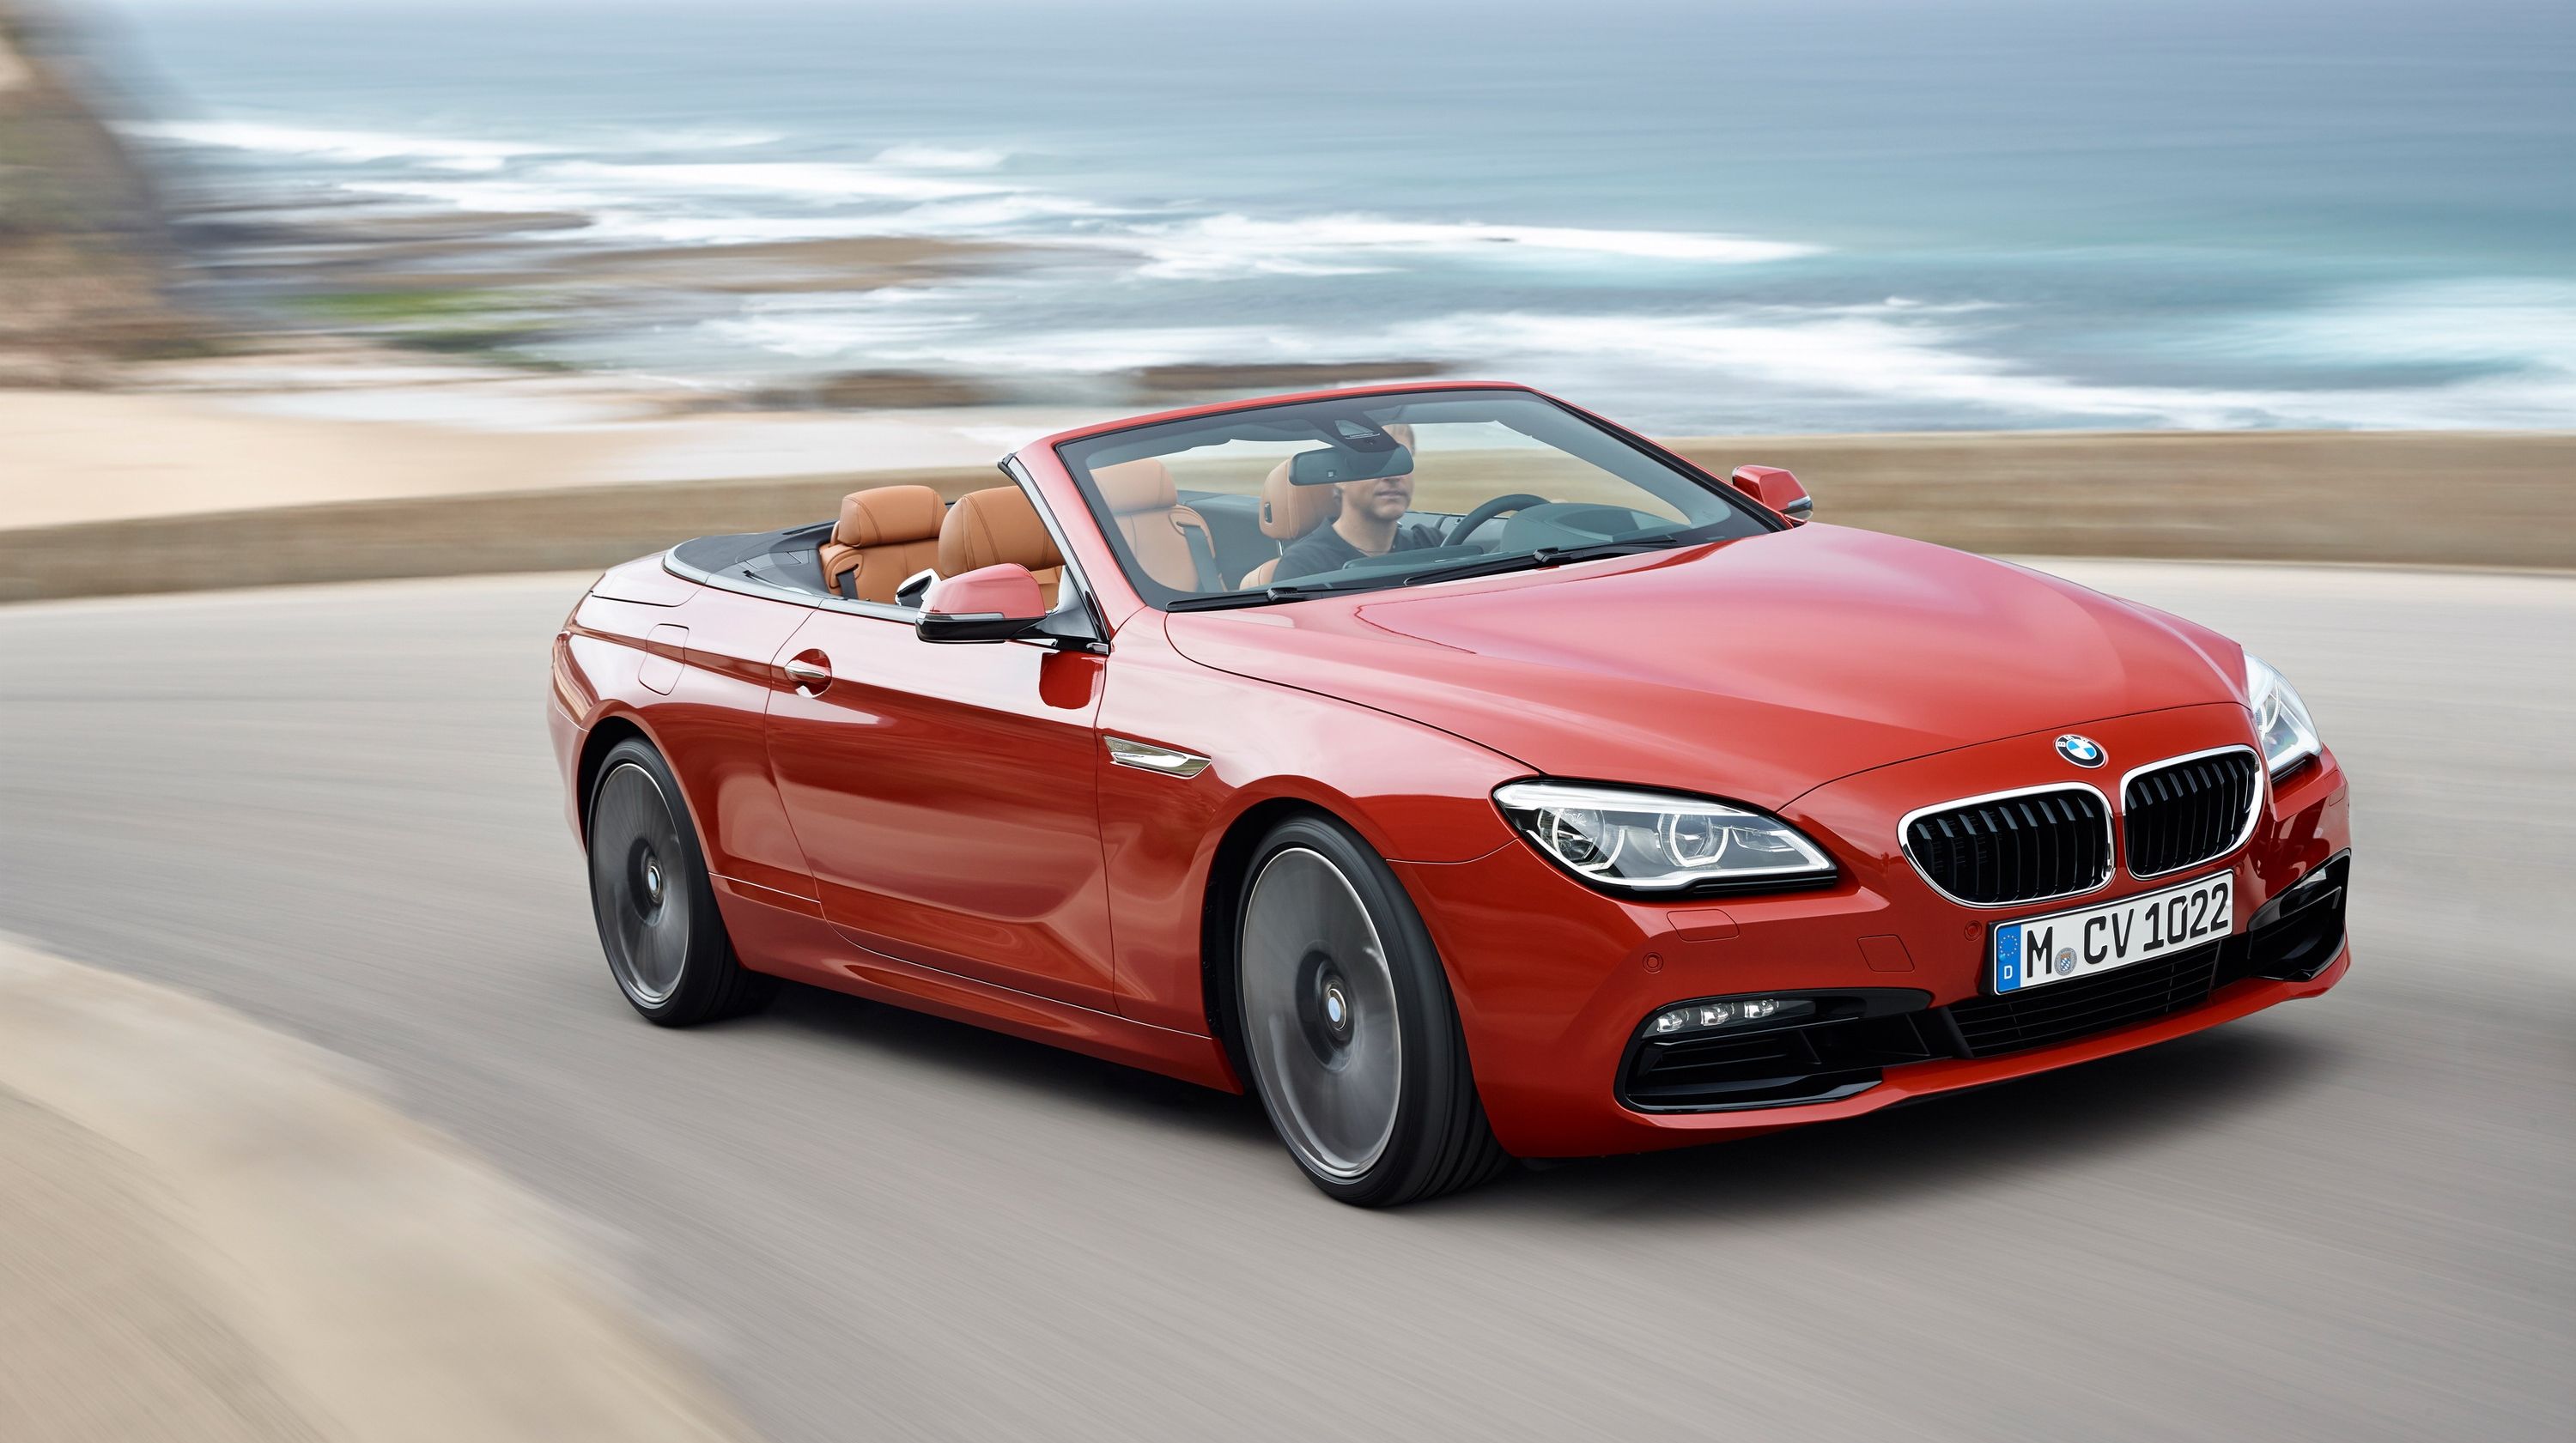  The entire 6 Series lineup has received a light refresh for the 2016 model year, including the convertible. 